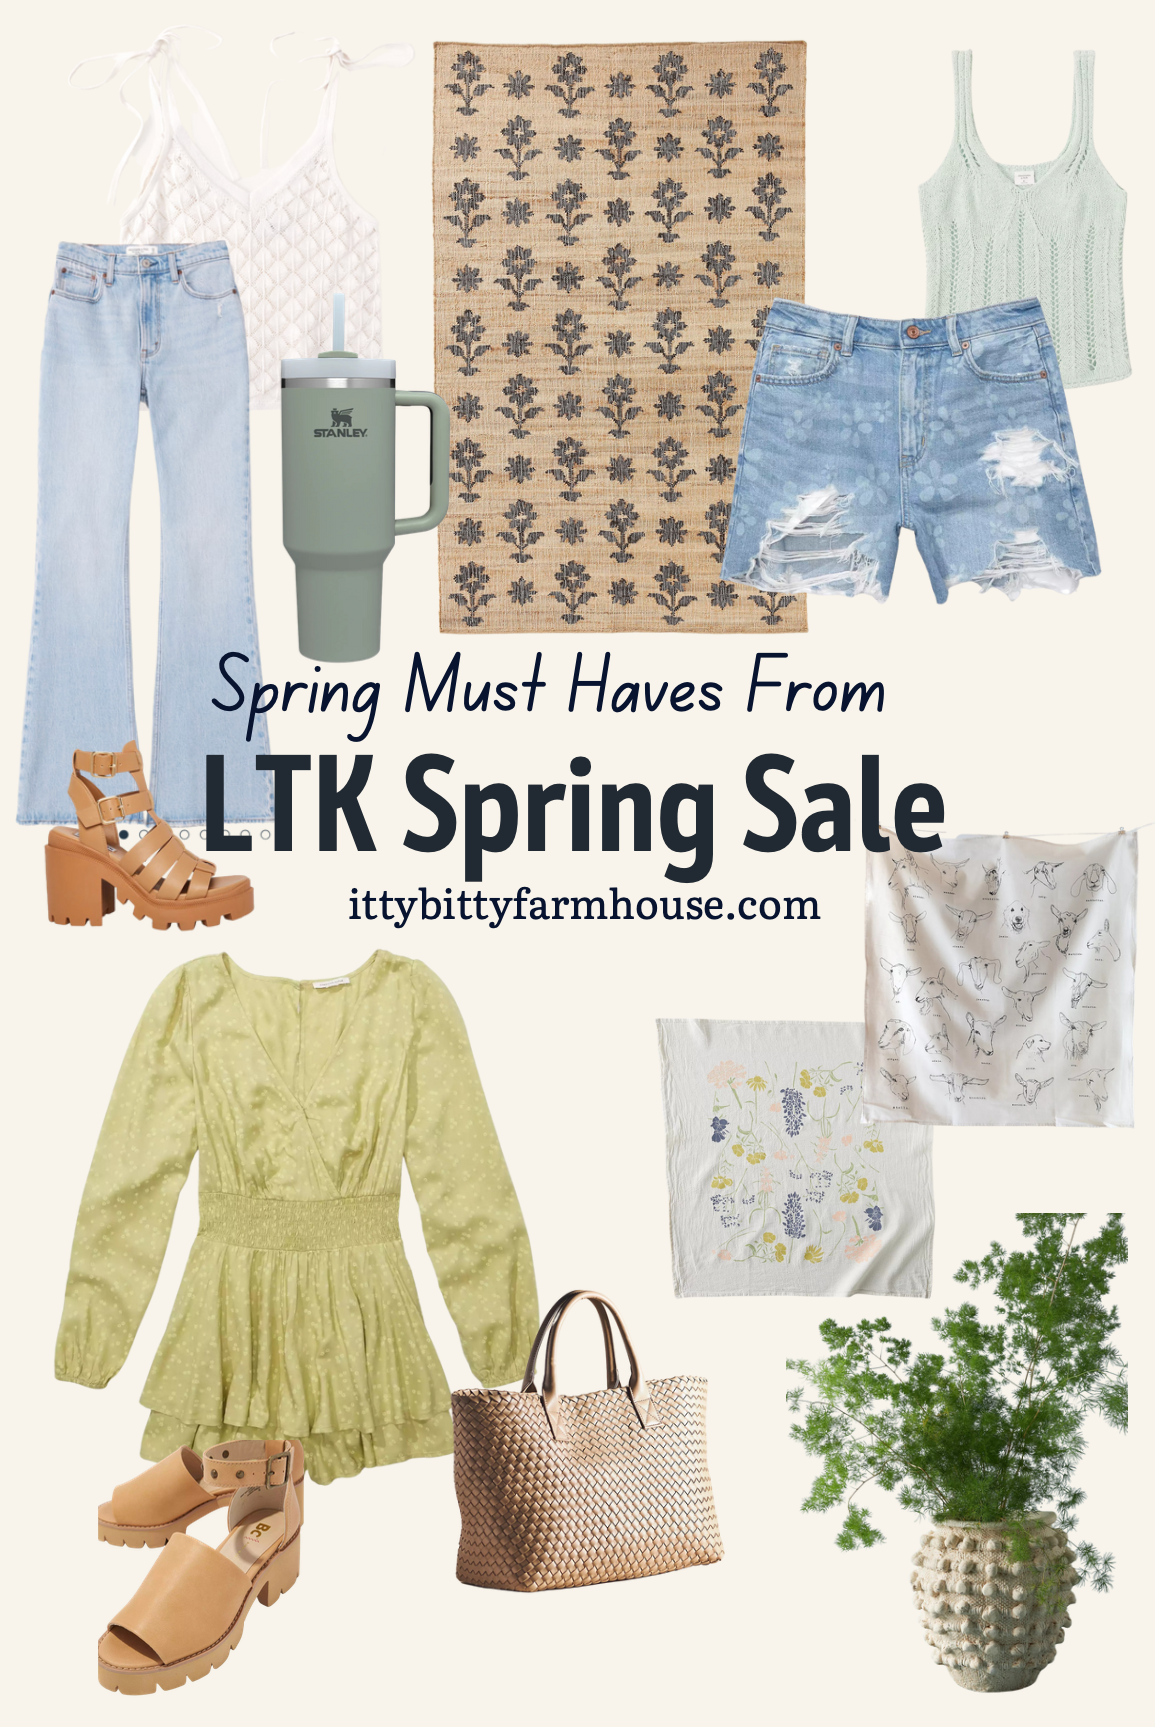 Spring Outfit and Home Finds